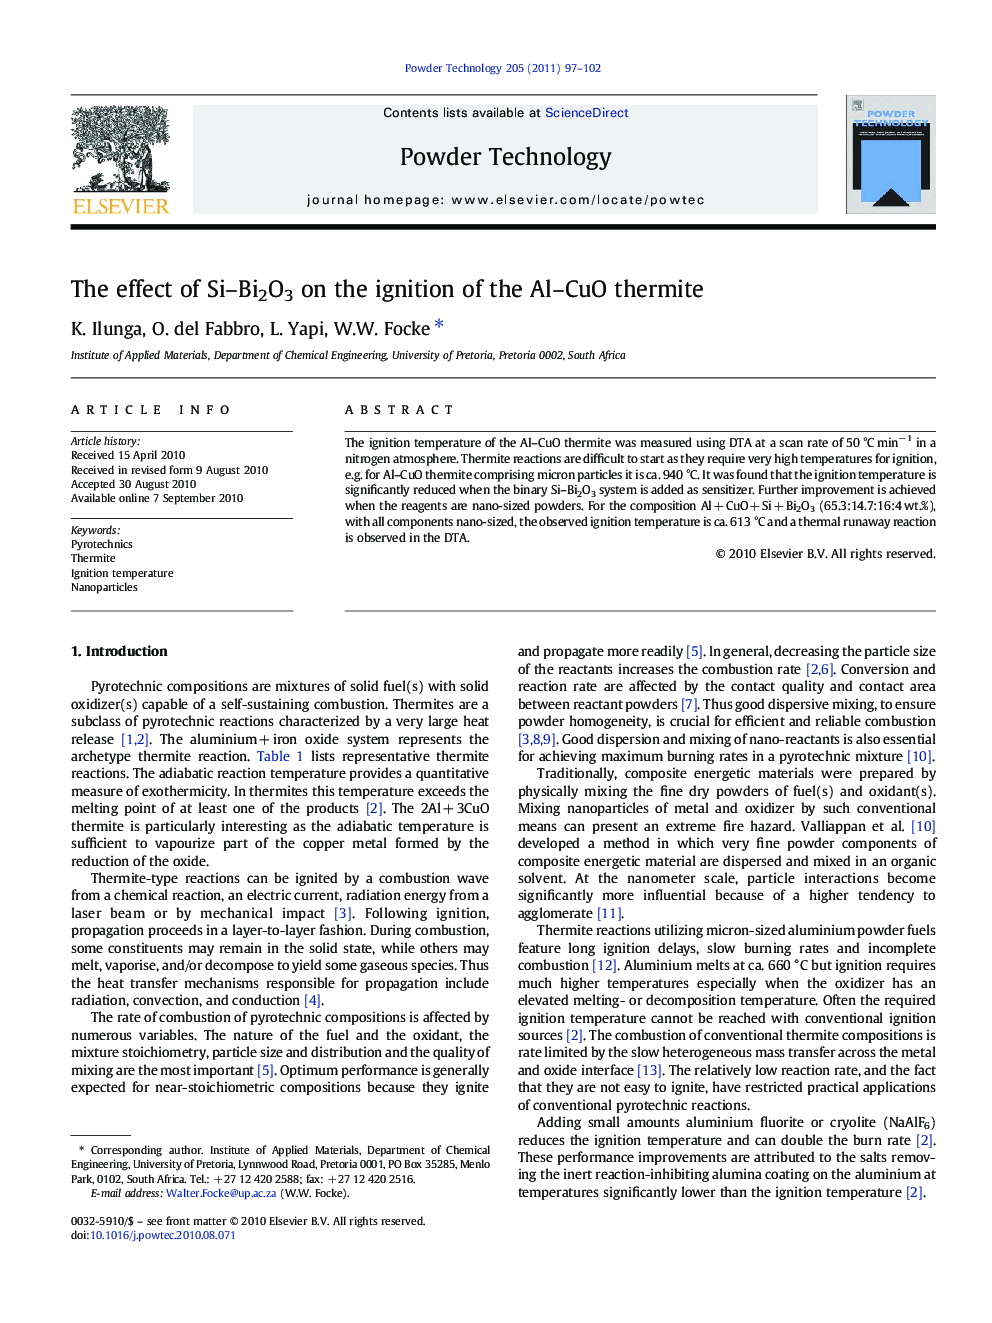 The effect of Si–Bi2O3 on the ignition of the Al–CuO thermite